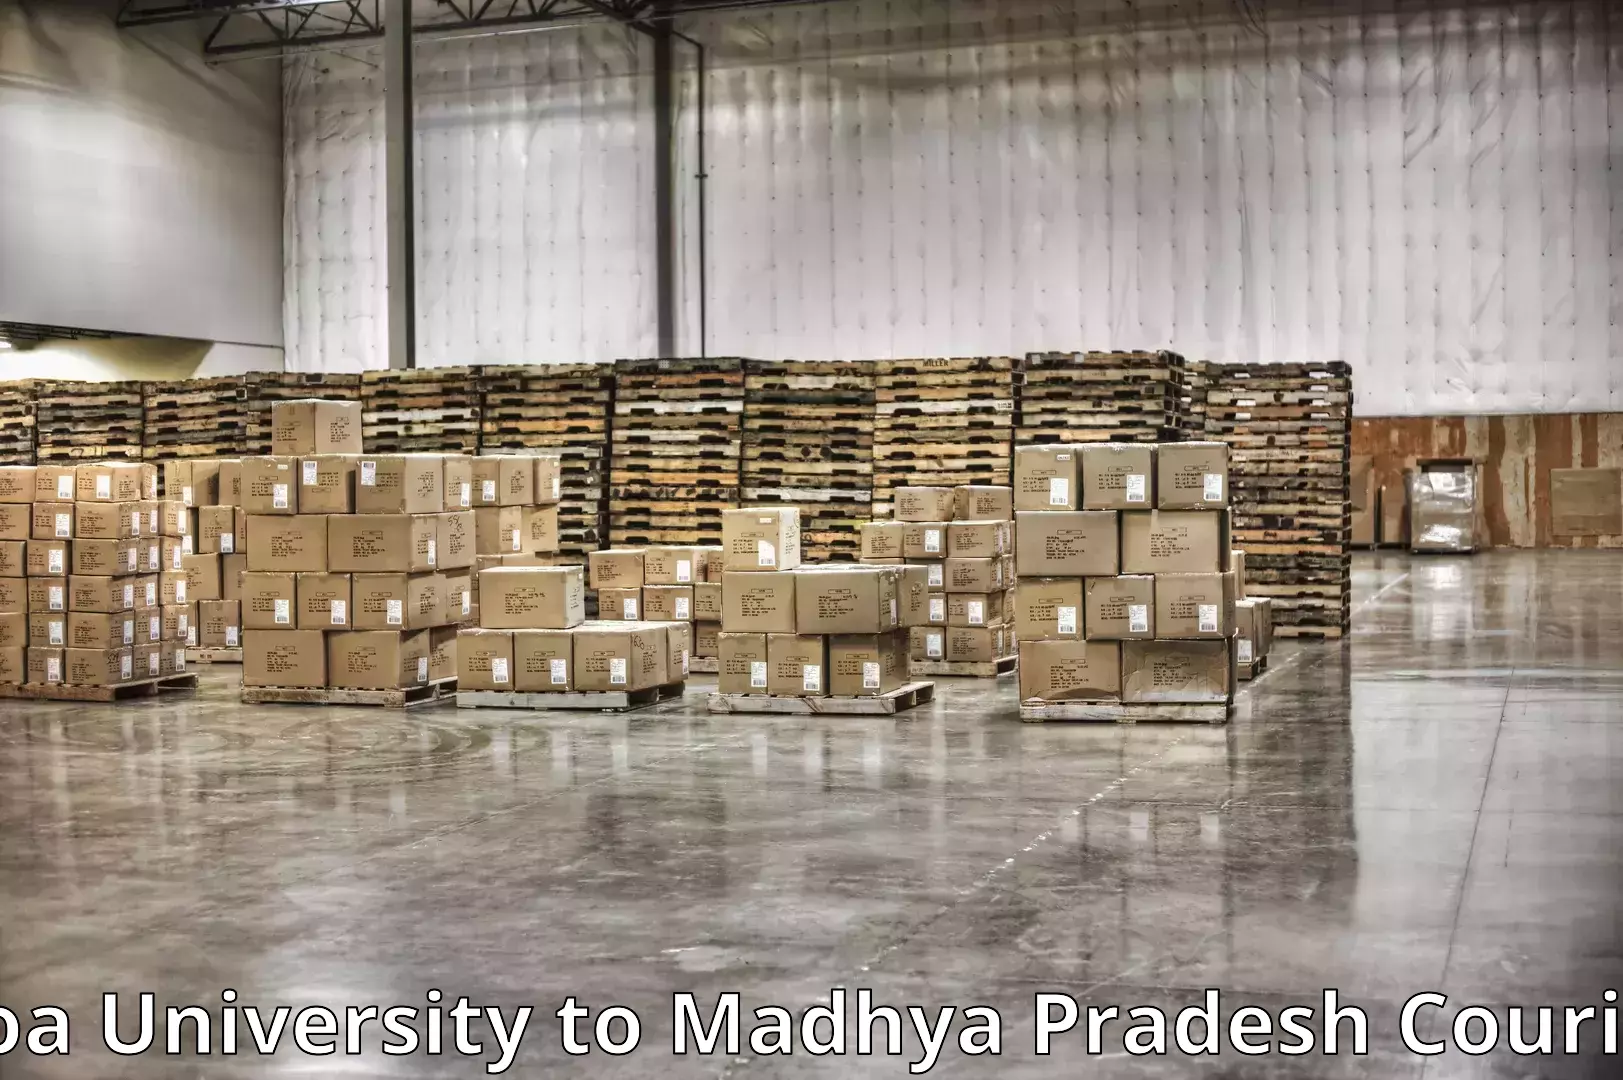 Reliable relocation services in Goa University to Nagda